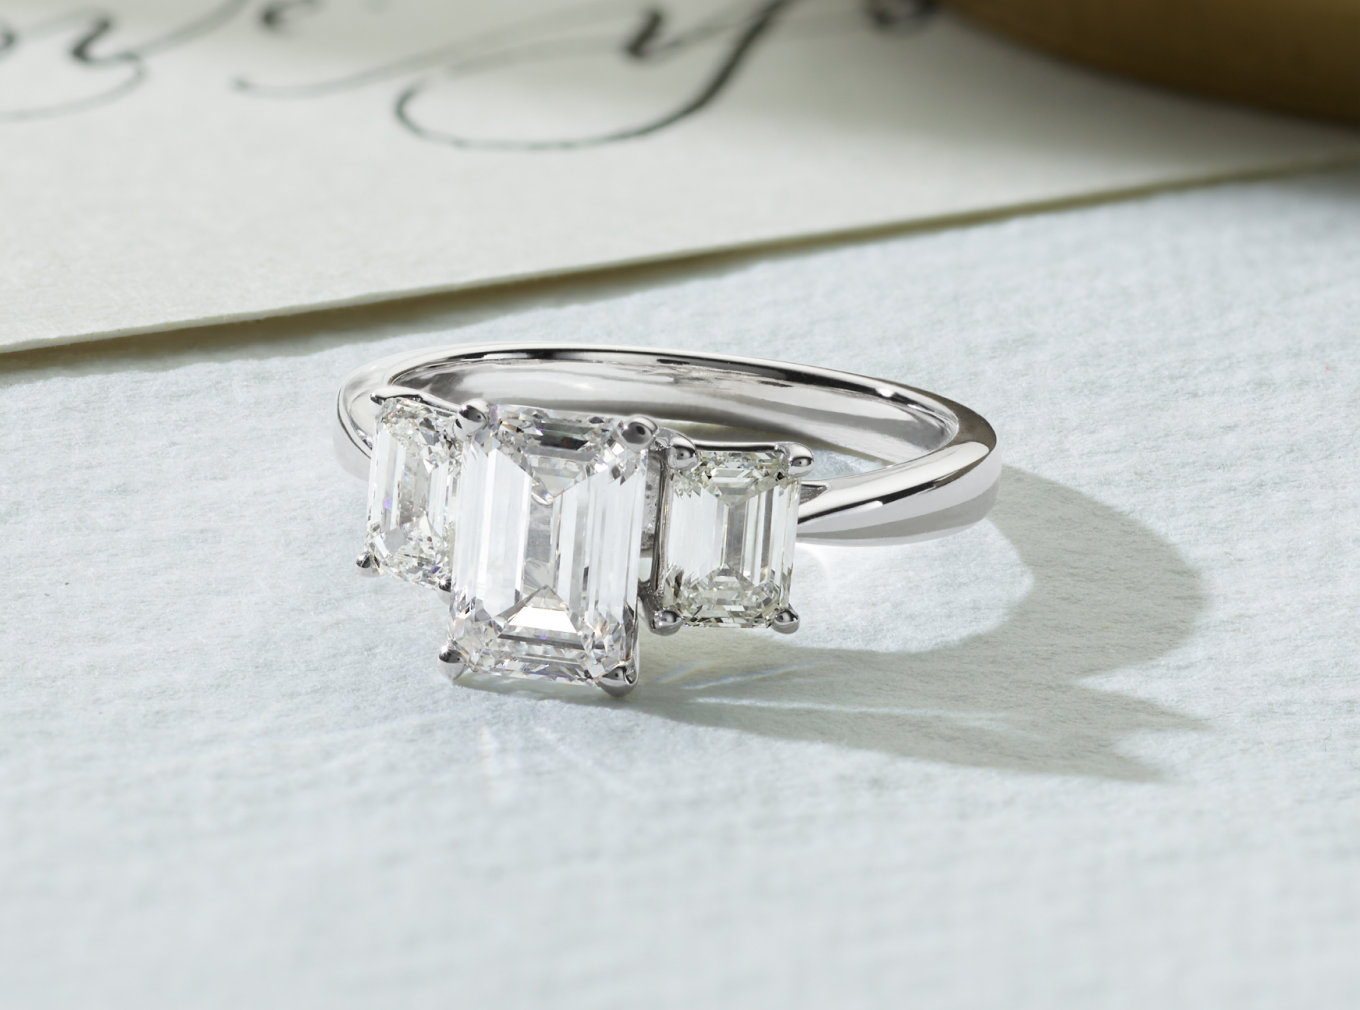 Gatsby Three-Stone Engagement Ring
Two stunning emerald cut natural diamonds accent the center stone of your choice in this classic three-stone design. Crafted in bright 14-karat white gold, this timeless engagement ring will sparkle for years to come. For more information on selecting your center stone, Live Chat online, call a customer service representative at 1-866-467-4263, or visit one of our store locations.